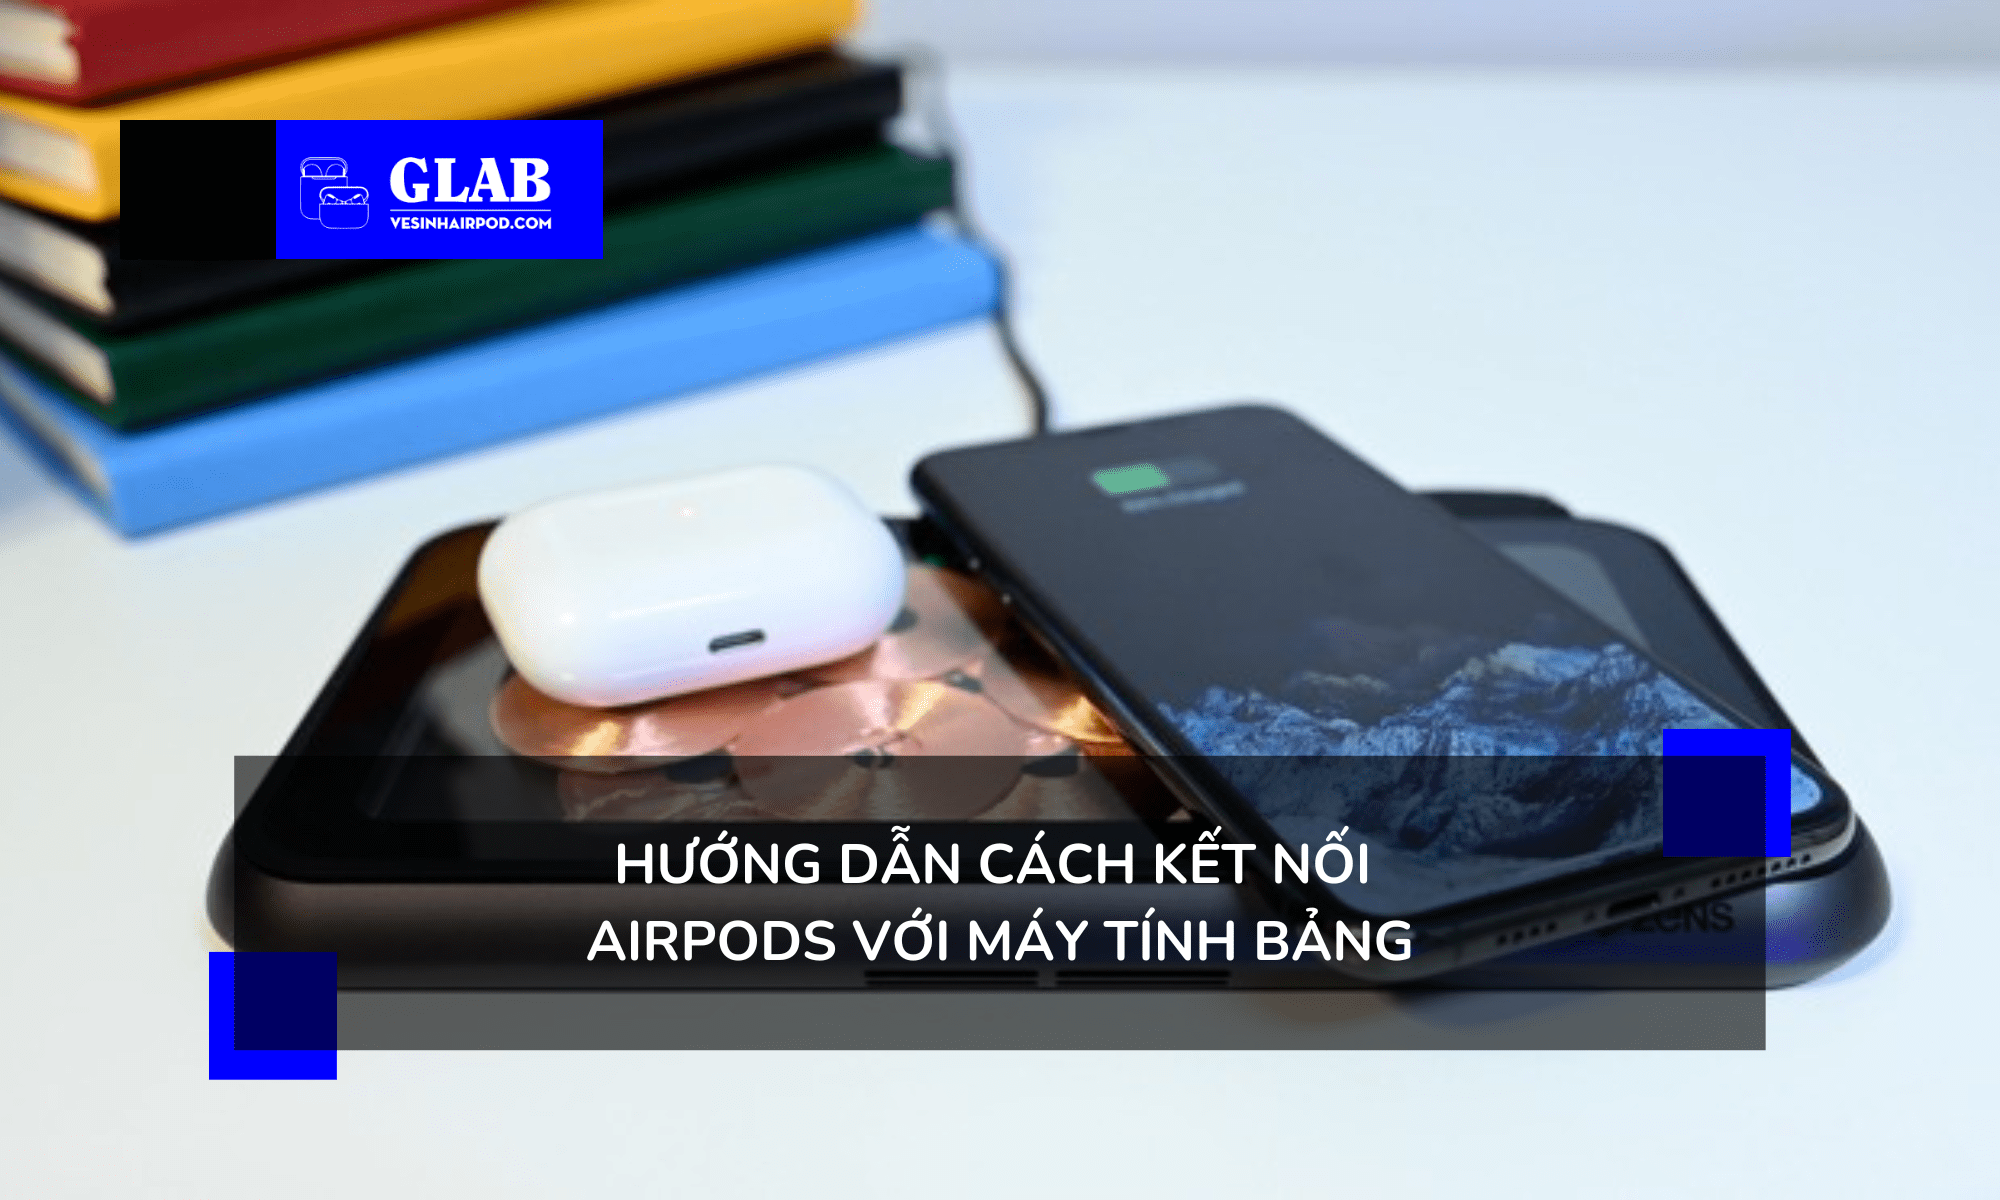 cach-ket-noi-airpods-voi-may-tinh-ban